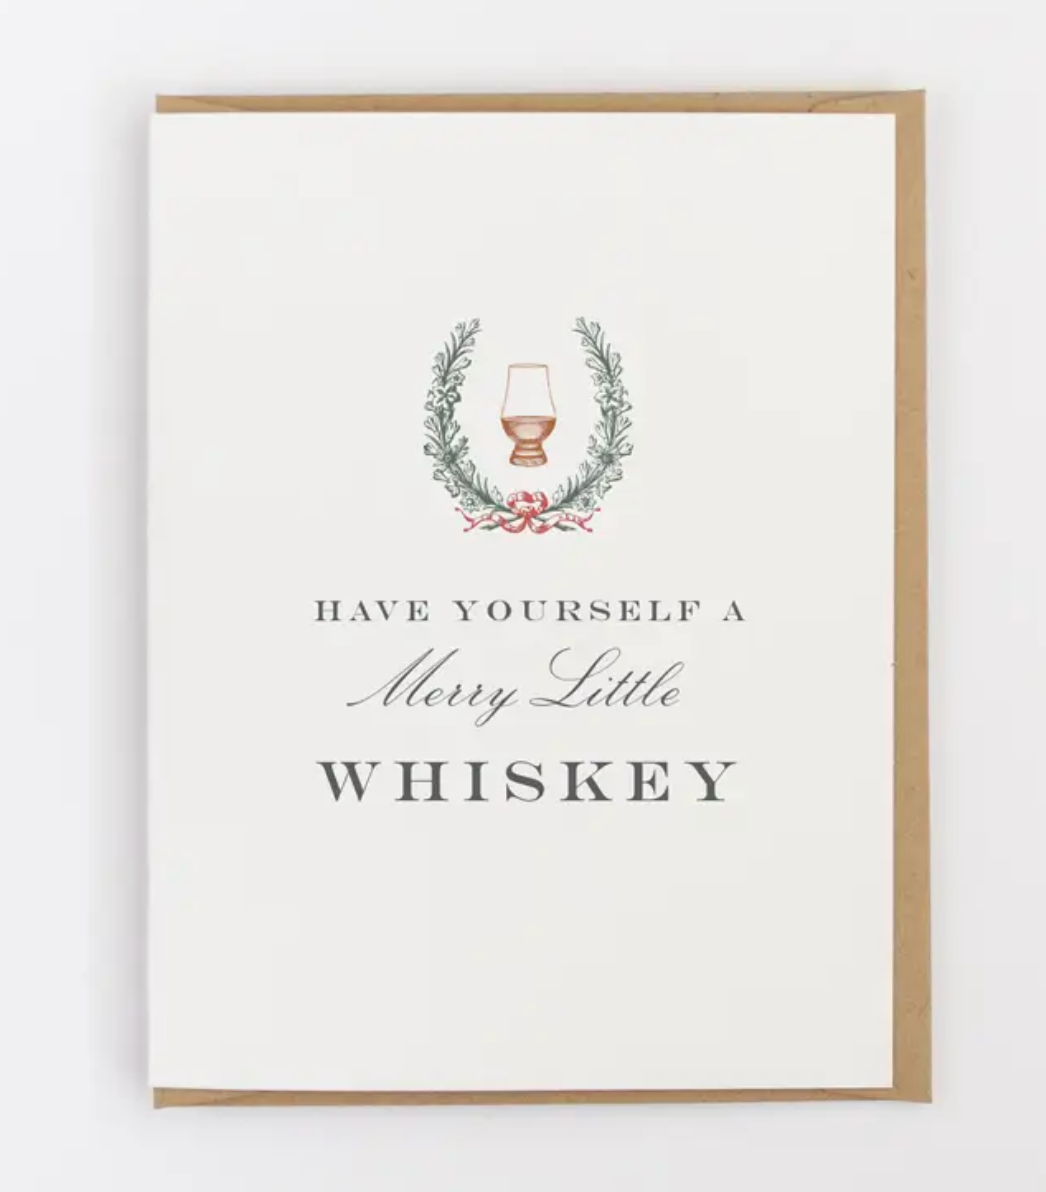 Have Yourself a Merry Little Whiskey Greeting Card